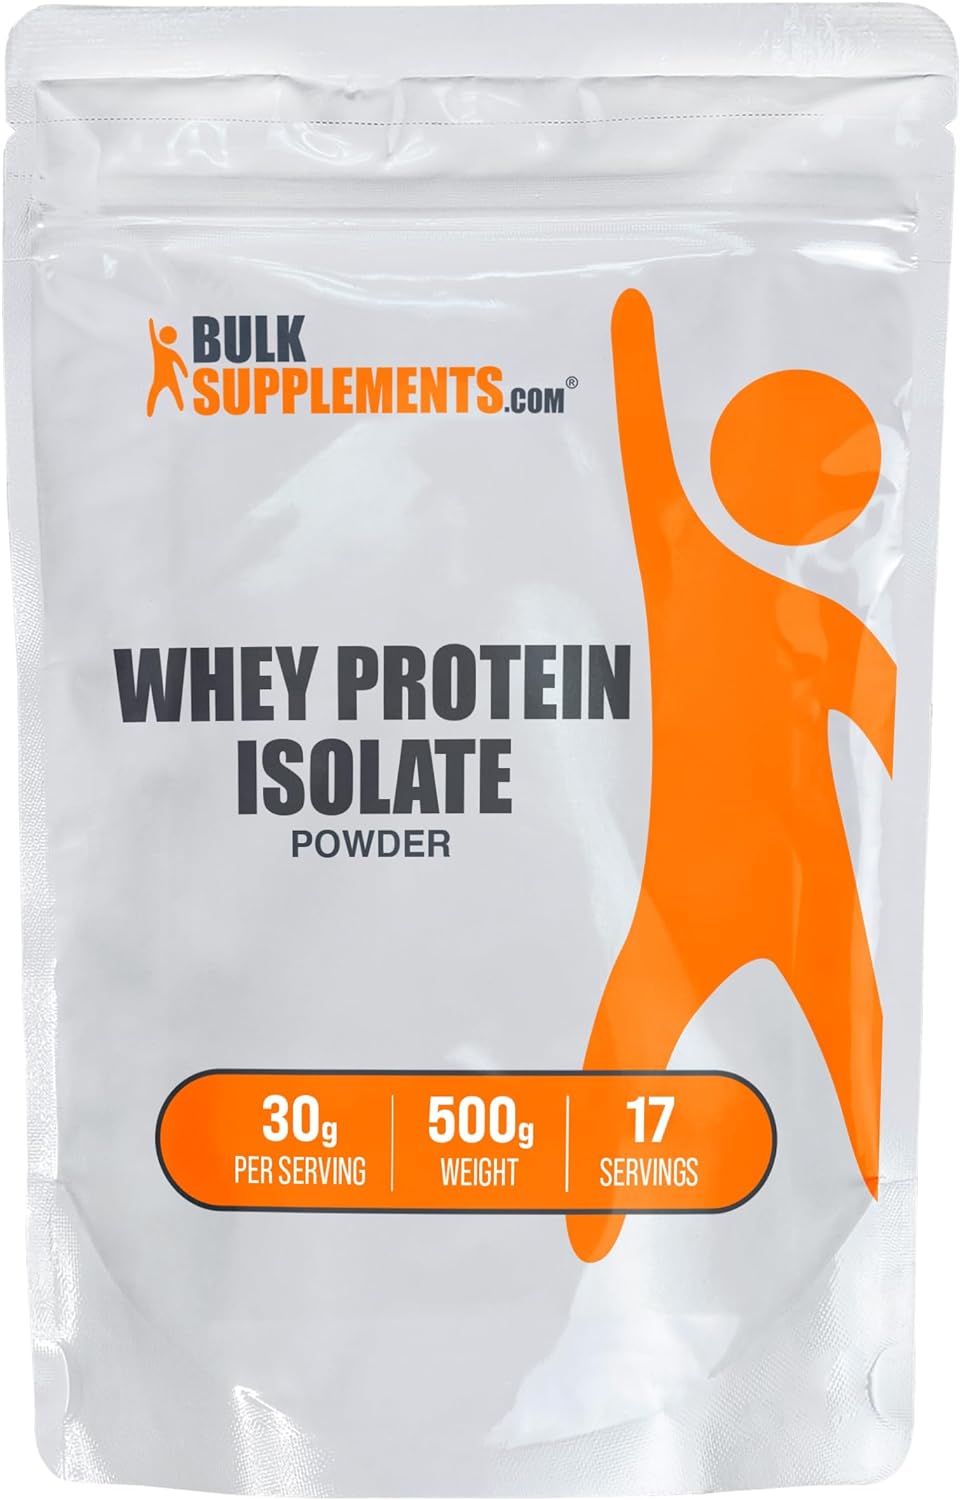 BULKSUPPLEMENTS.COM Whey Protein Isolate Powder - Unflavored Protein P